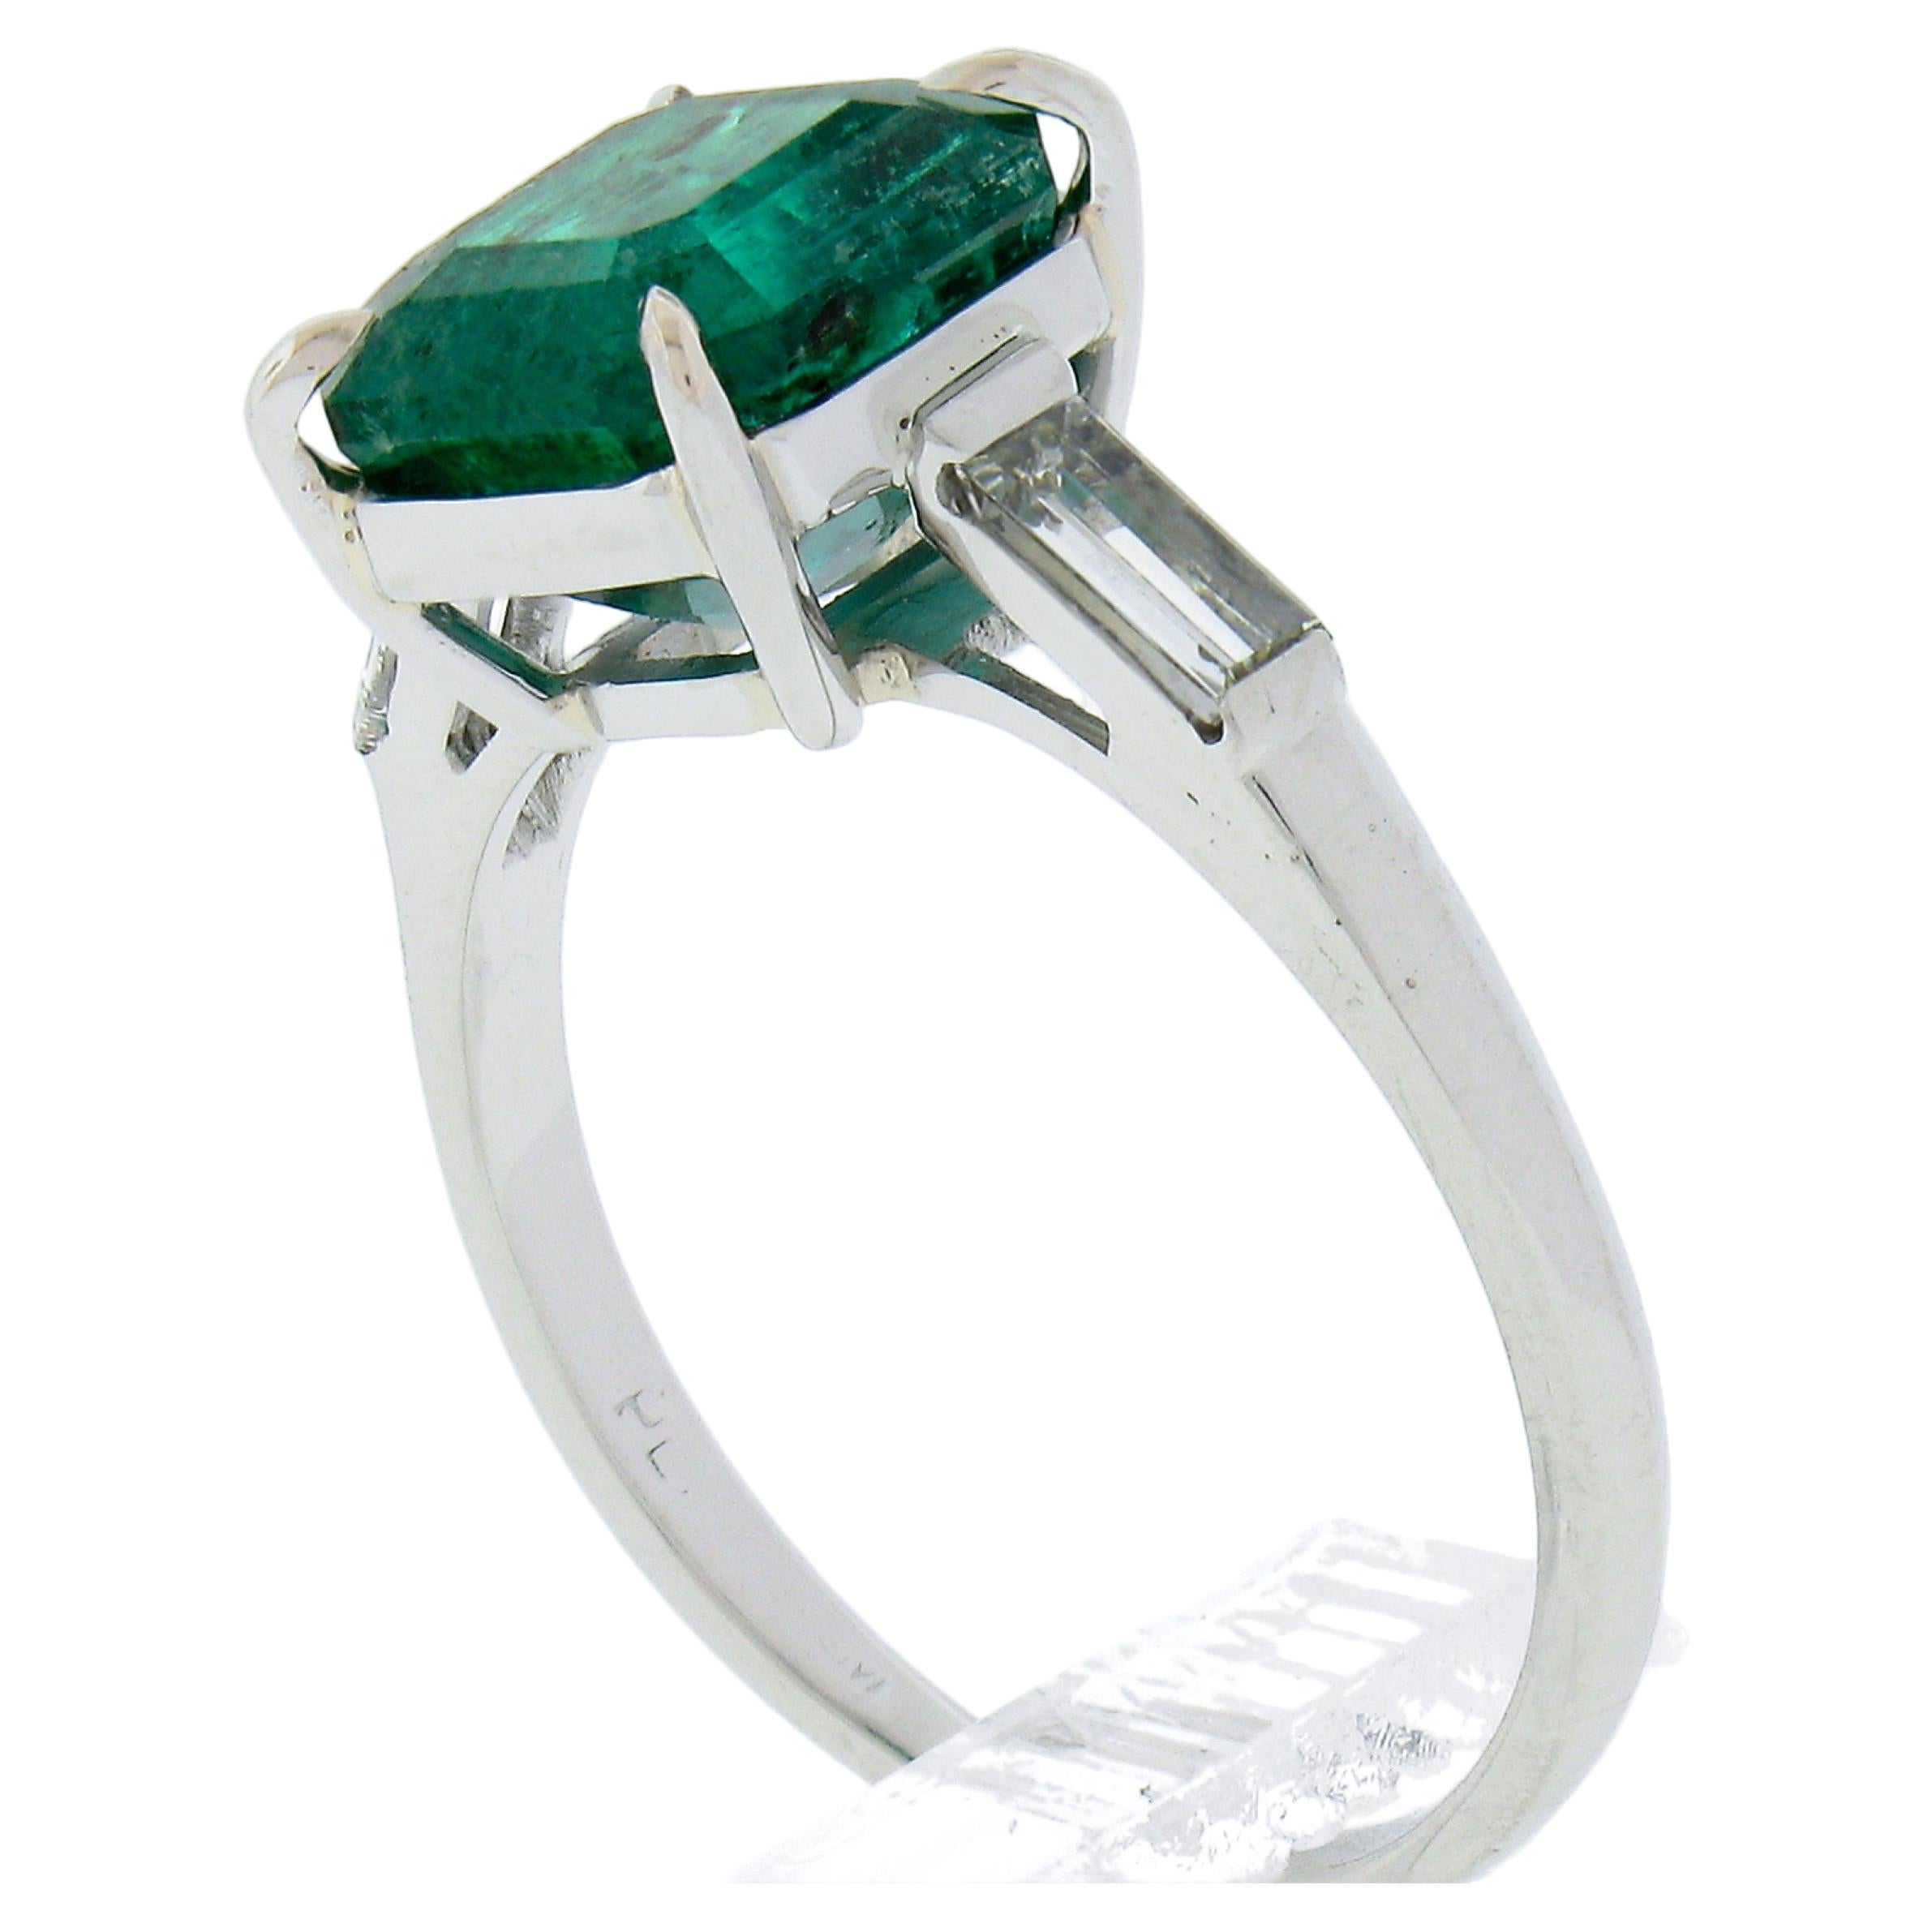 --Stone(s):--
(1) Natural Genuine Emerald - Octagonal Step Cut - Claw Prong Set -  Lively & Vivid Green Color w/ Natural Inclusions - 3.26ct (exact - certified)
 **See Certification Details Below** 
(2) Natural Genuine Diamonds - Baguette Cut -